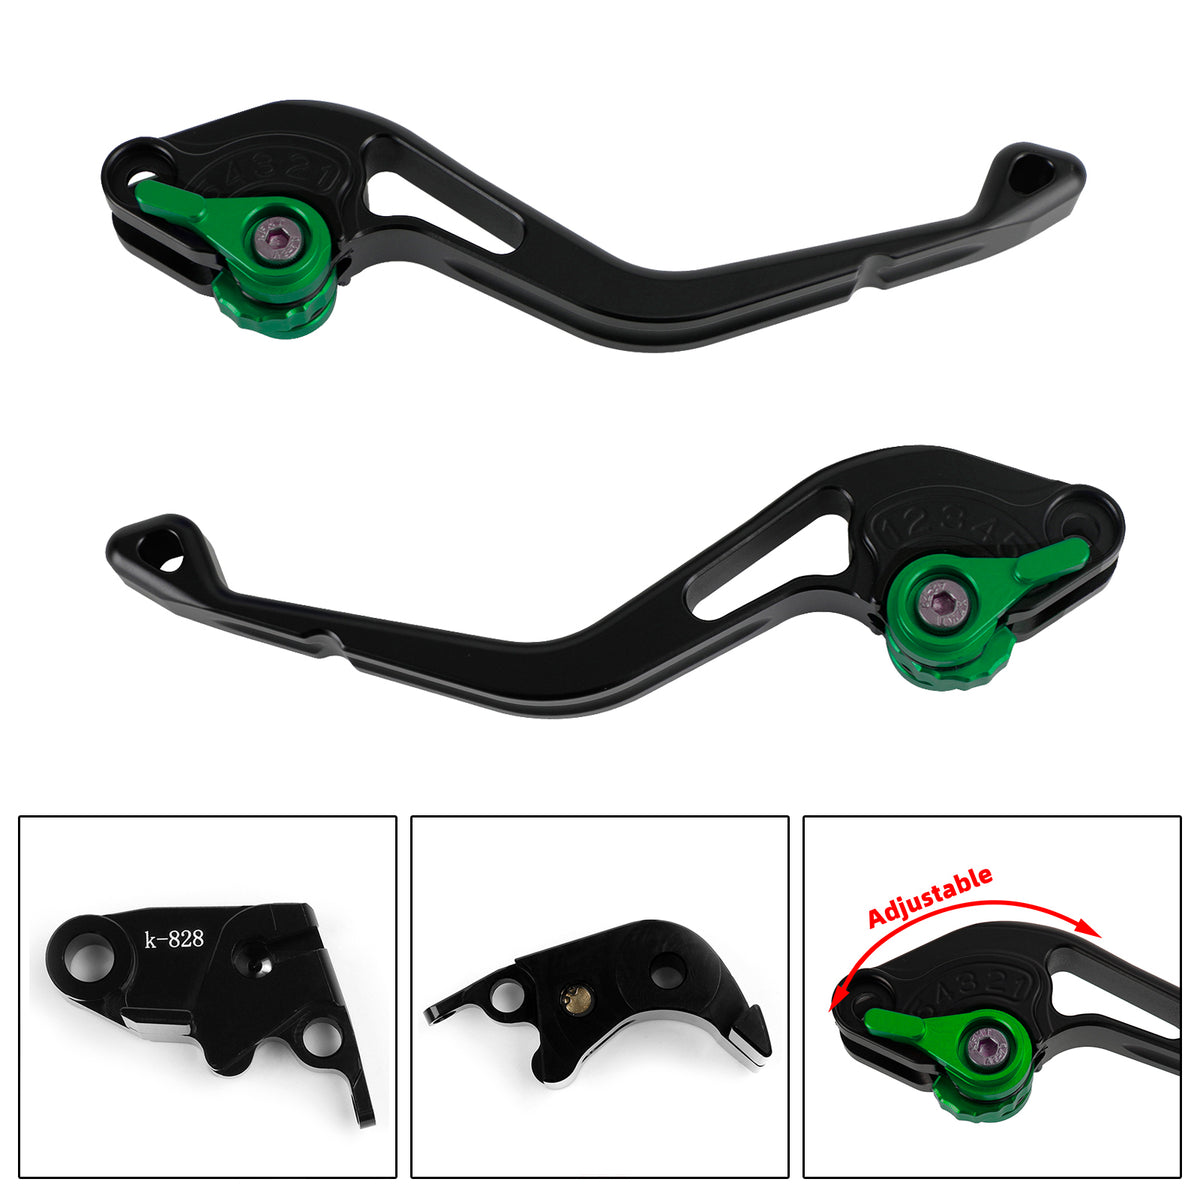 NEW Short Clutch Brake Lever fit for Kawasaki ZX636R / ZX6RR 2005-2006